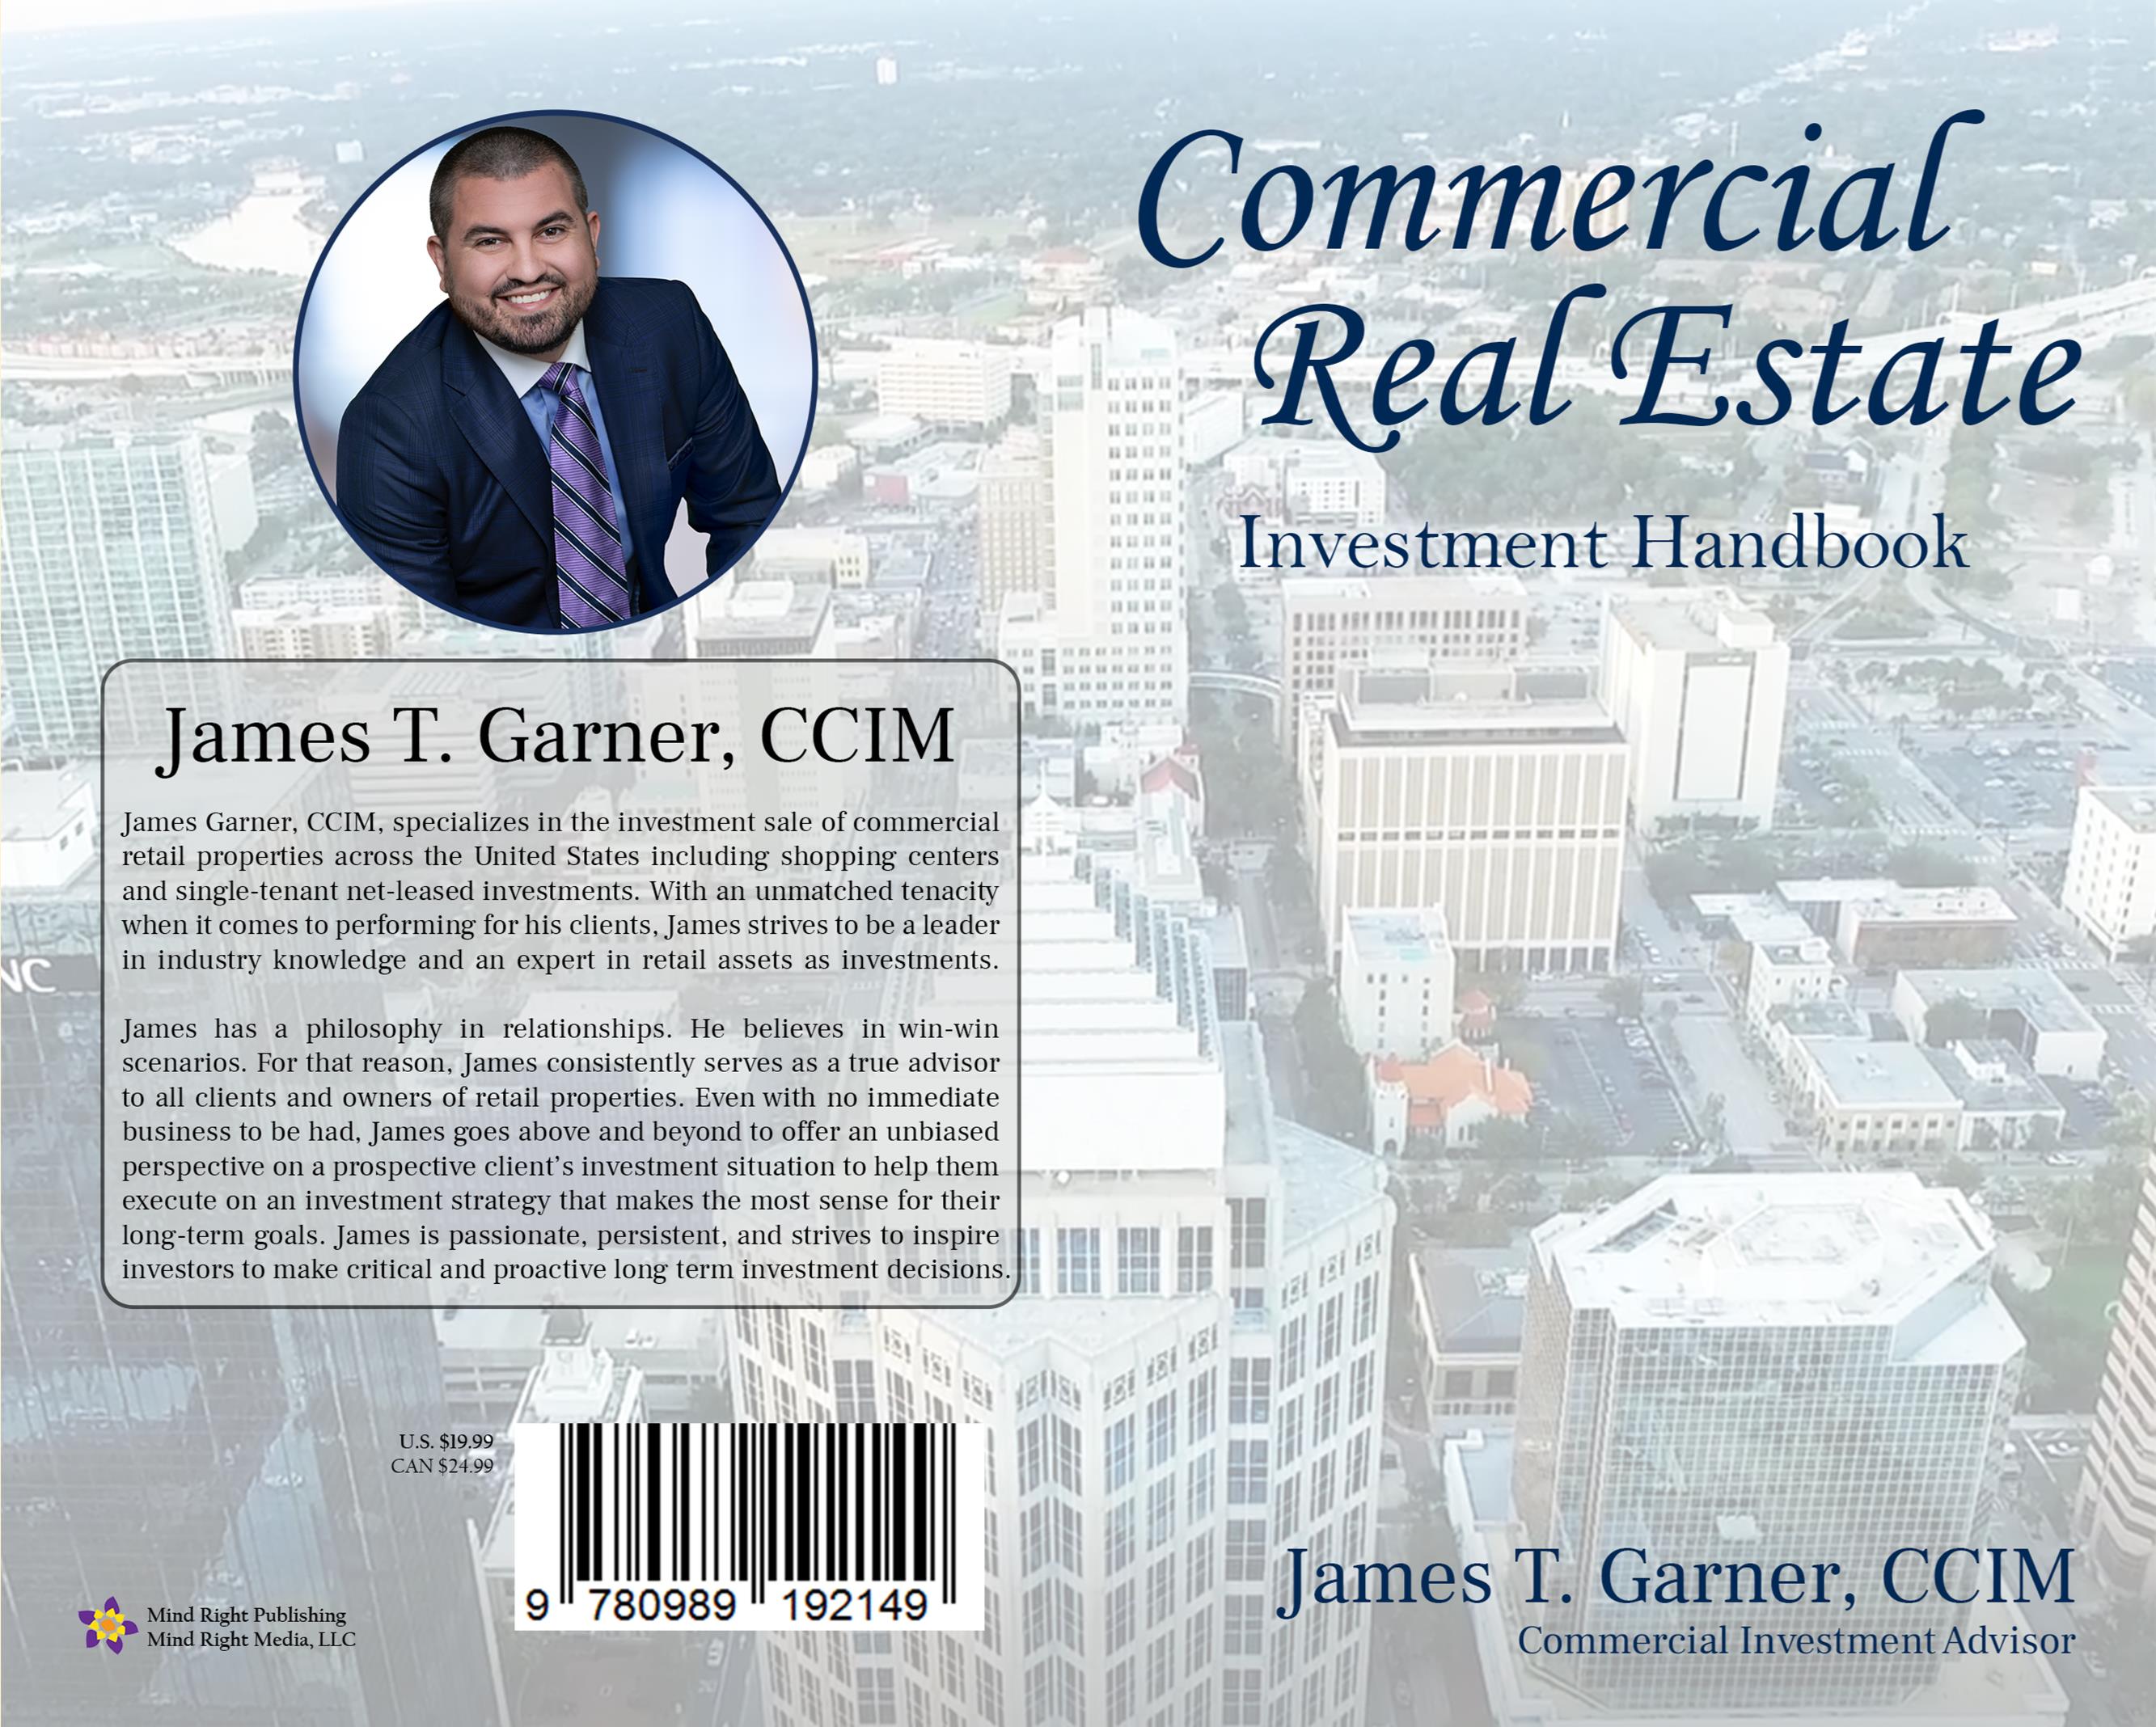 Commercial Real Estate Investment Handbook cover image